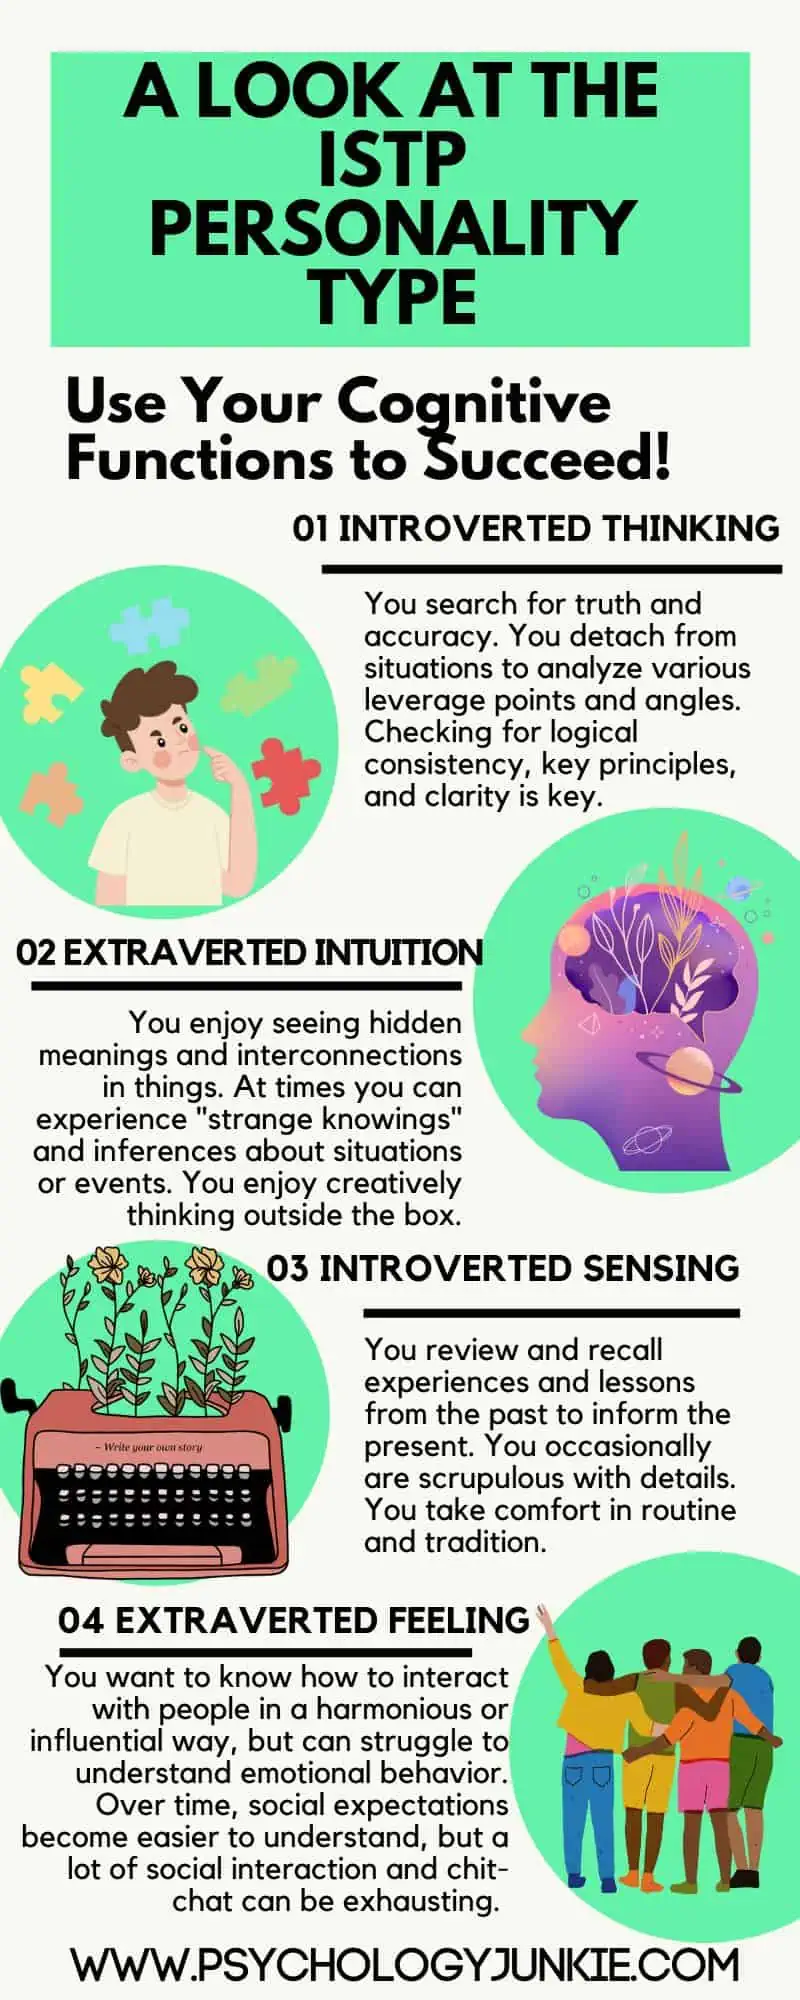 10 Tips for INTJ Personality Types: Traits, Careers, Spirituality & More